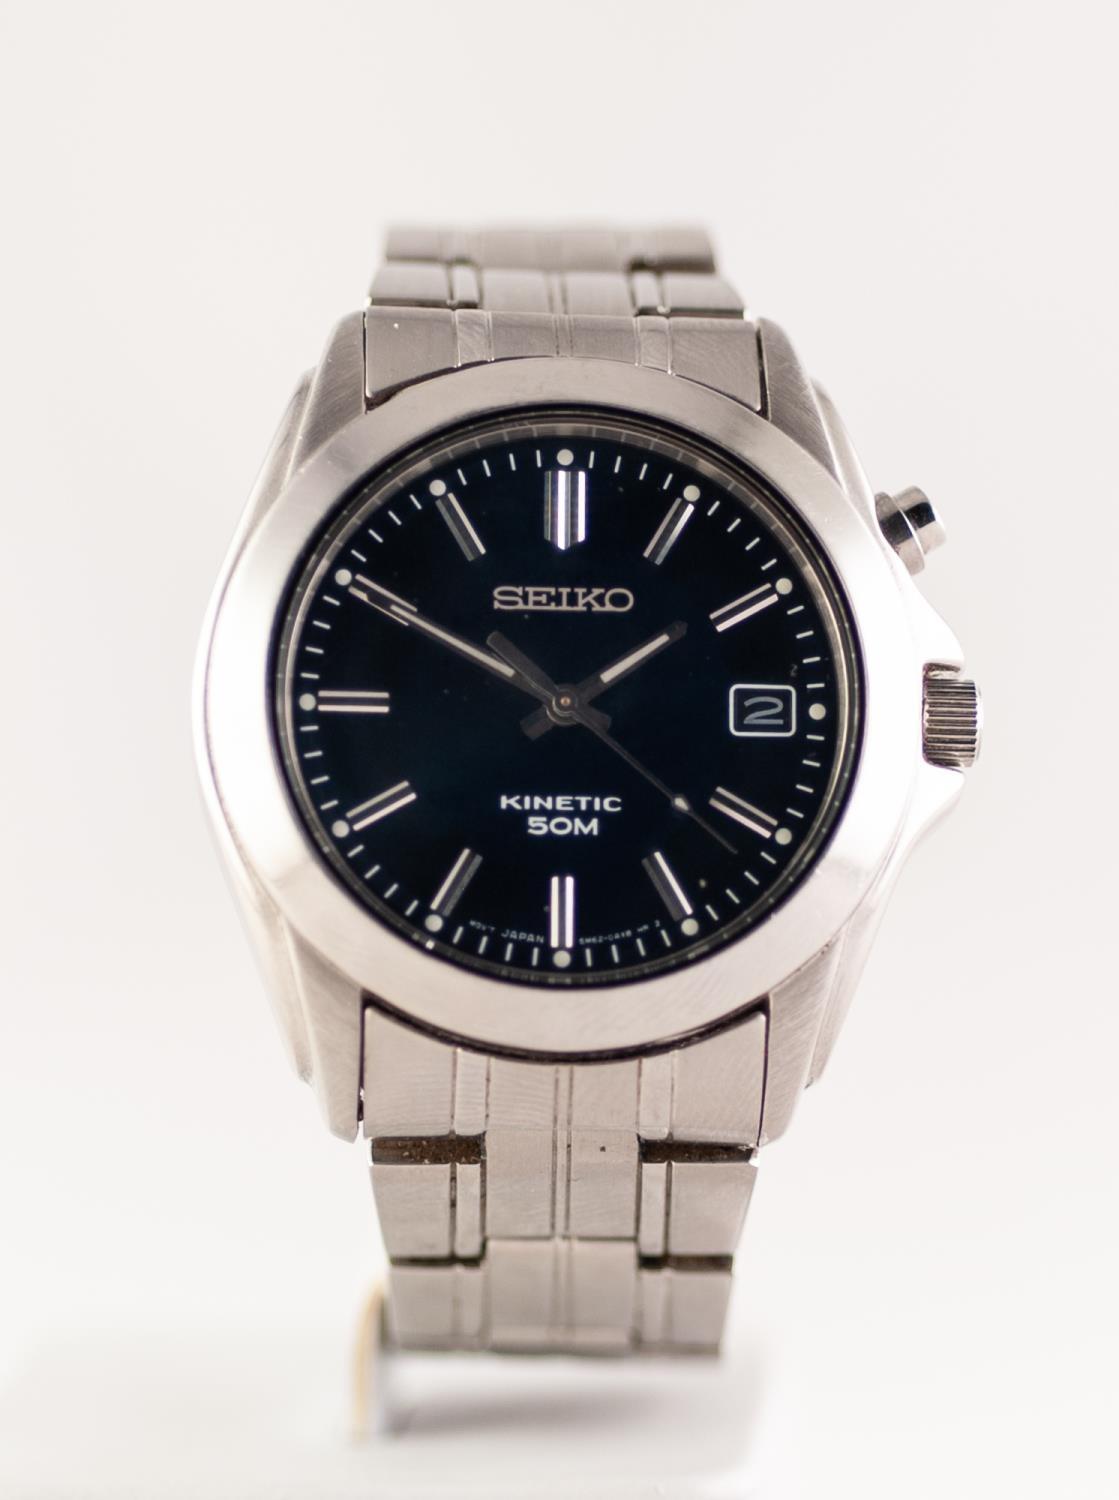 GENTS SEIKO STAINLESS STEEL WRIST WATCH with KINETIC automatic movements, with one button black dial - Image 2 of 3